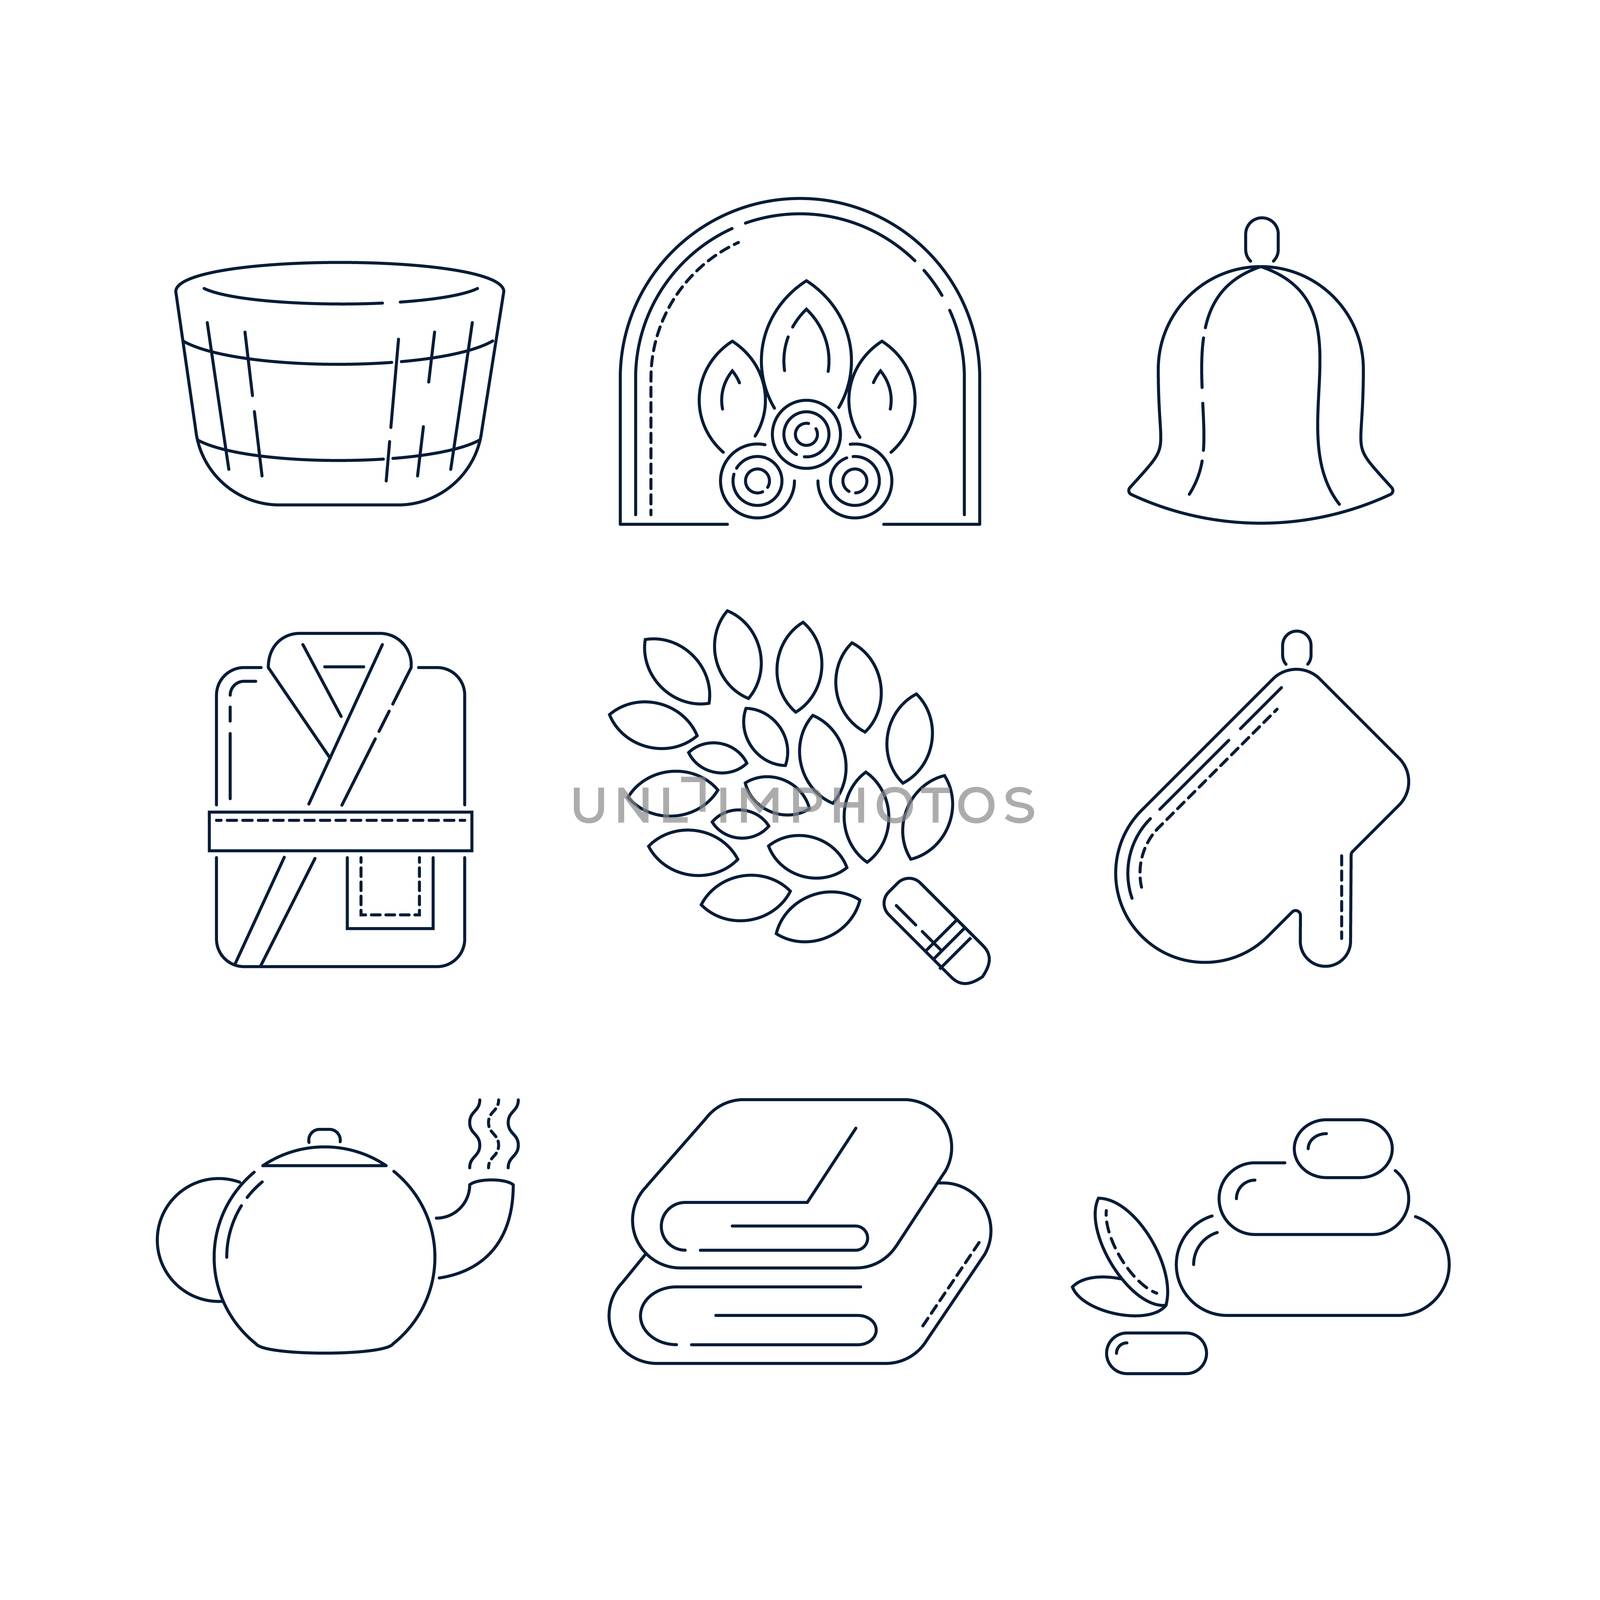 Spa, sauna relax linear icons. Fireplace, mitt, herbal tea, sauna broom and other accessories for the bath. Health and body care thin line icons.